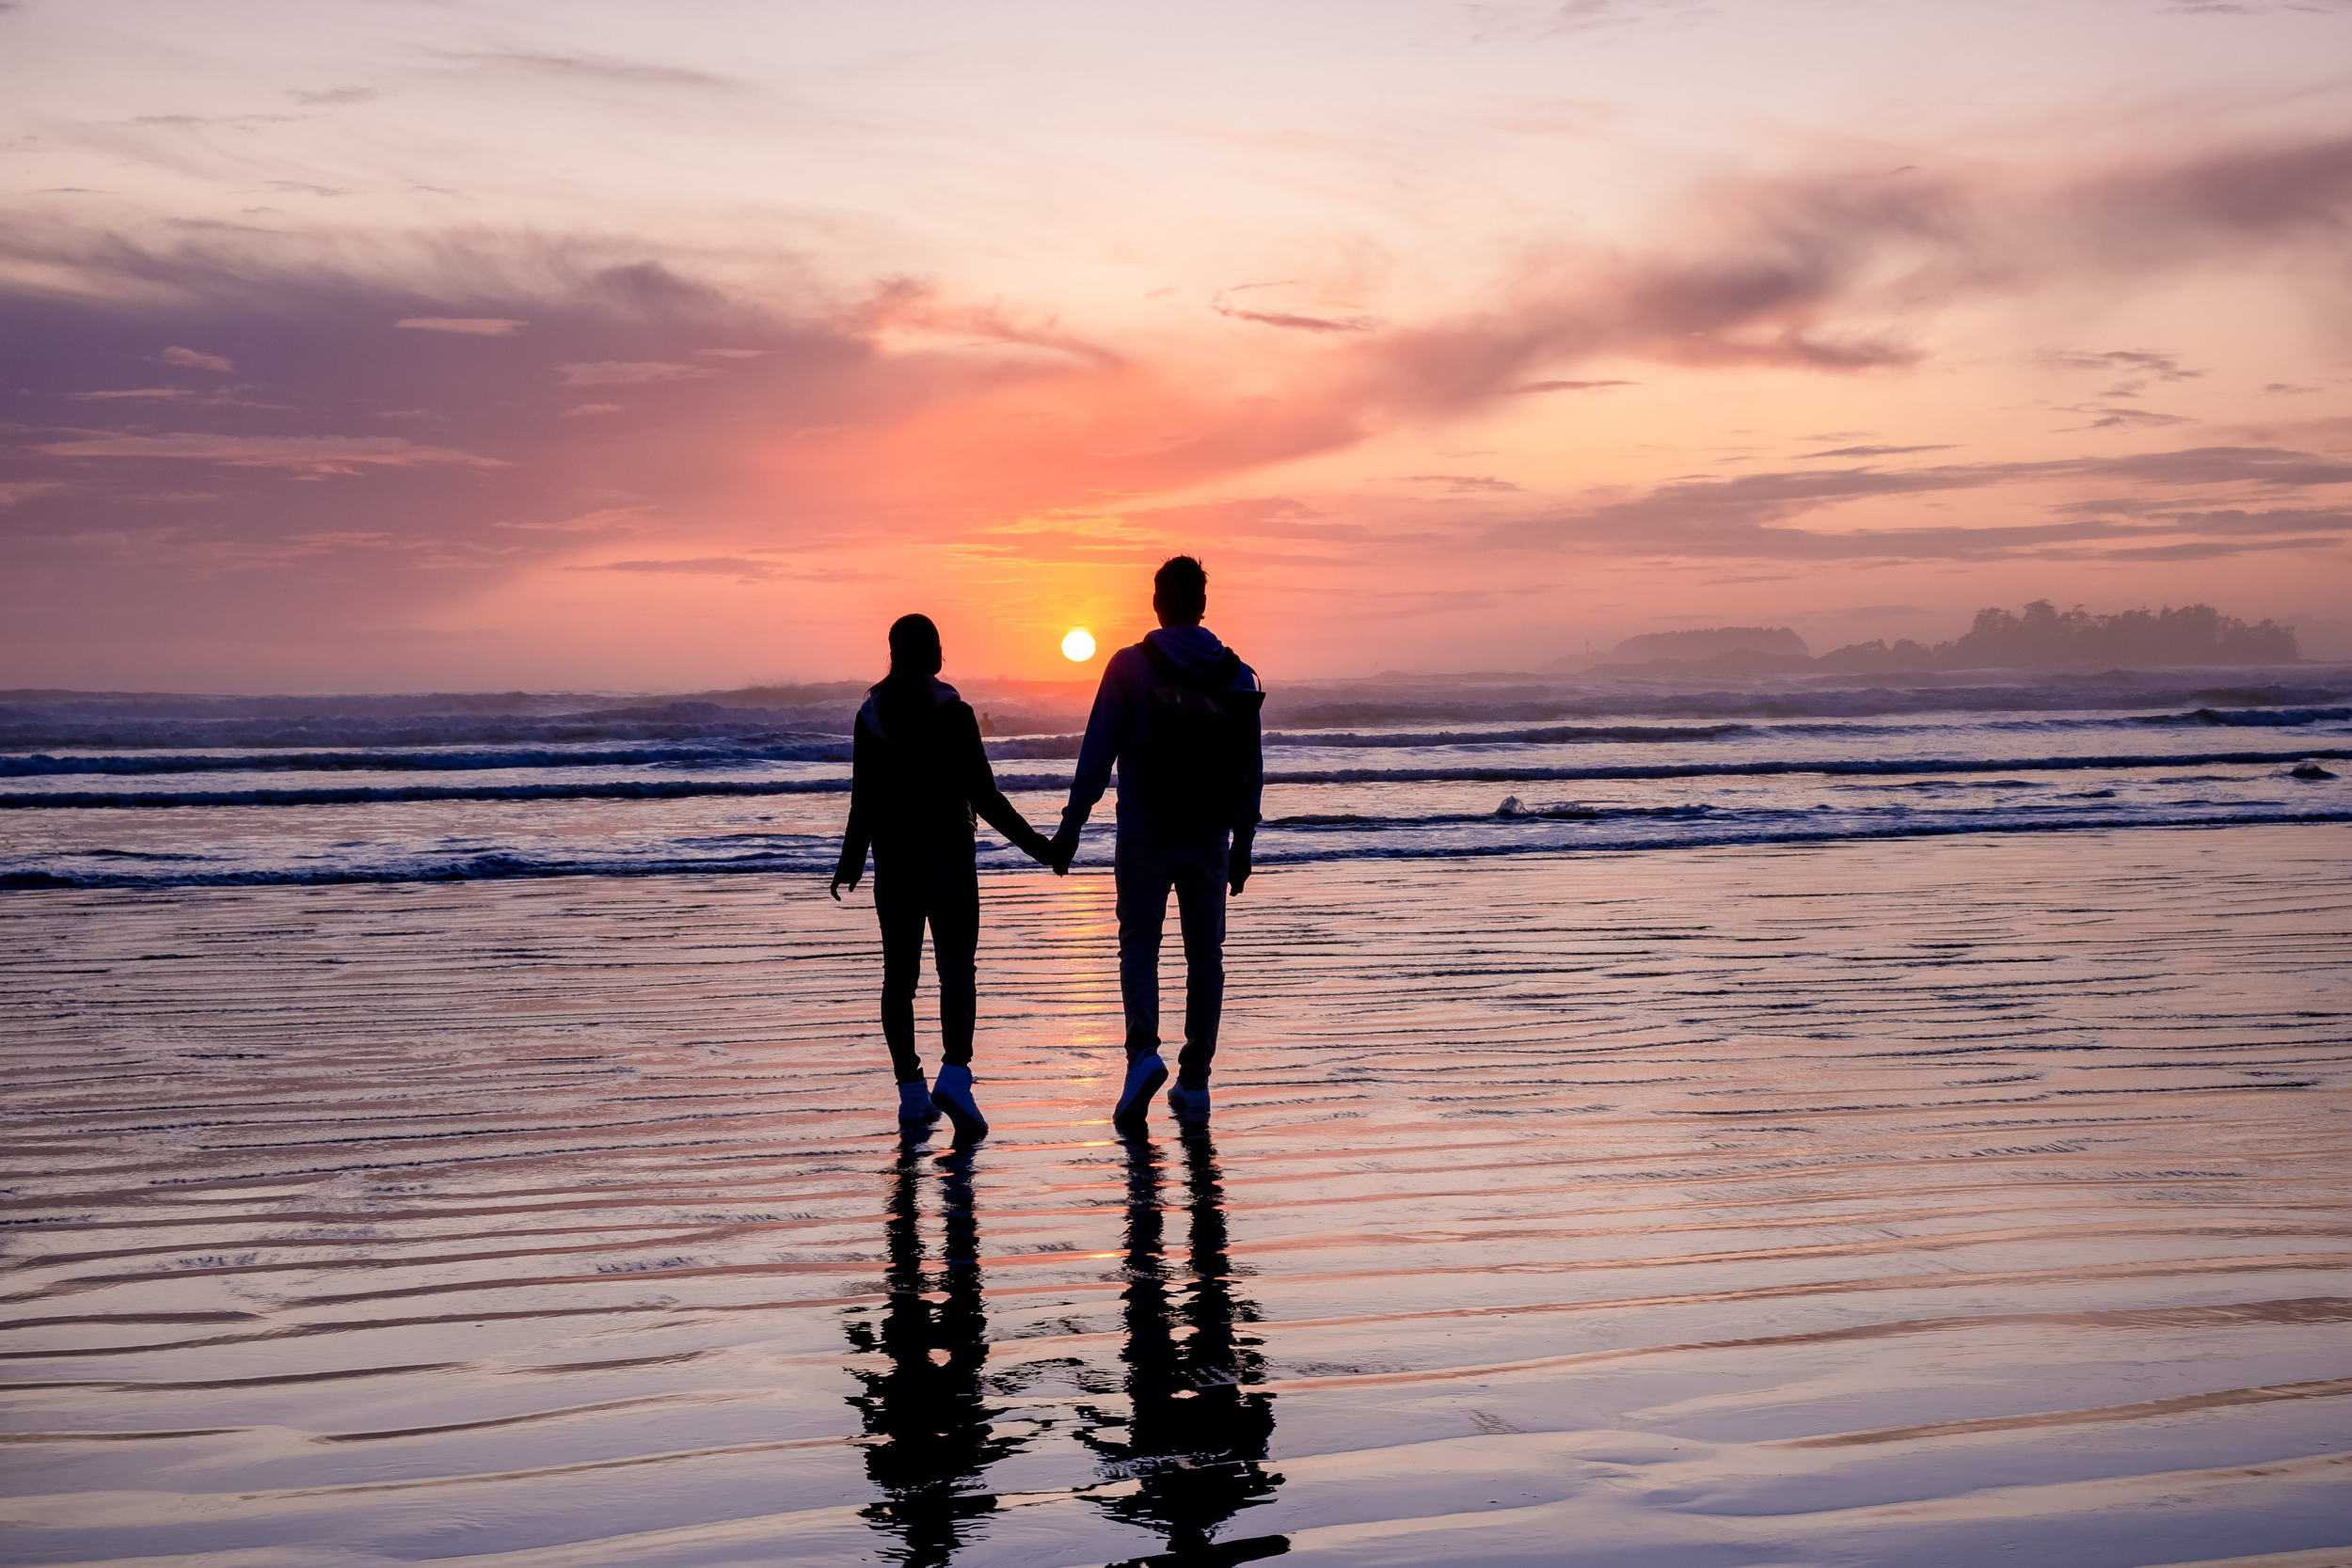 <p>Canada’s surfers’ paradise is also great for outdoor-loving couples who want an island escape. Located on Vancouver Island, Tofino has some of the best beaches on the West Coast. Relax in an oceanside cabin, enjoy numerous hiking trails, or maybe try and catch a wave!</p><p><a href='https://www.msn.com/en-us/community/channel/vid-cj9pqbr0vn9in2b6ddcd8sfgpfq6x6utp44fssrv6mc2gtybw0us'>Follow us on MSN to see more of our exclusive lifestyle content.</a></p>